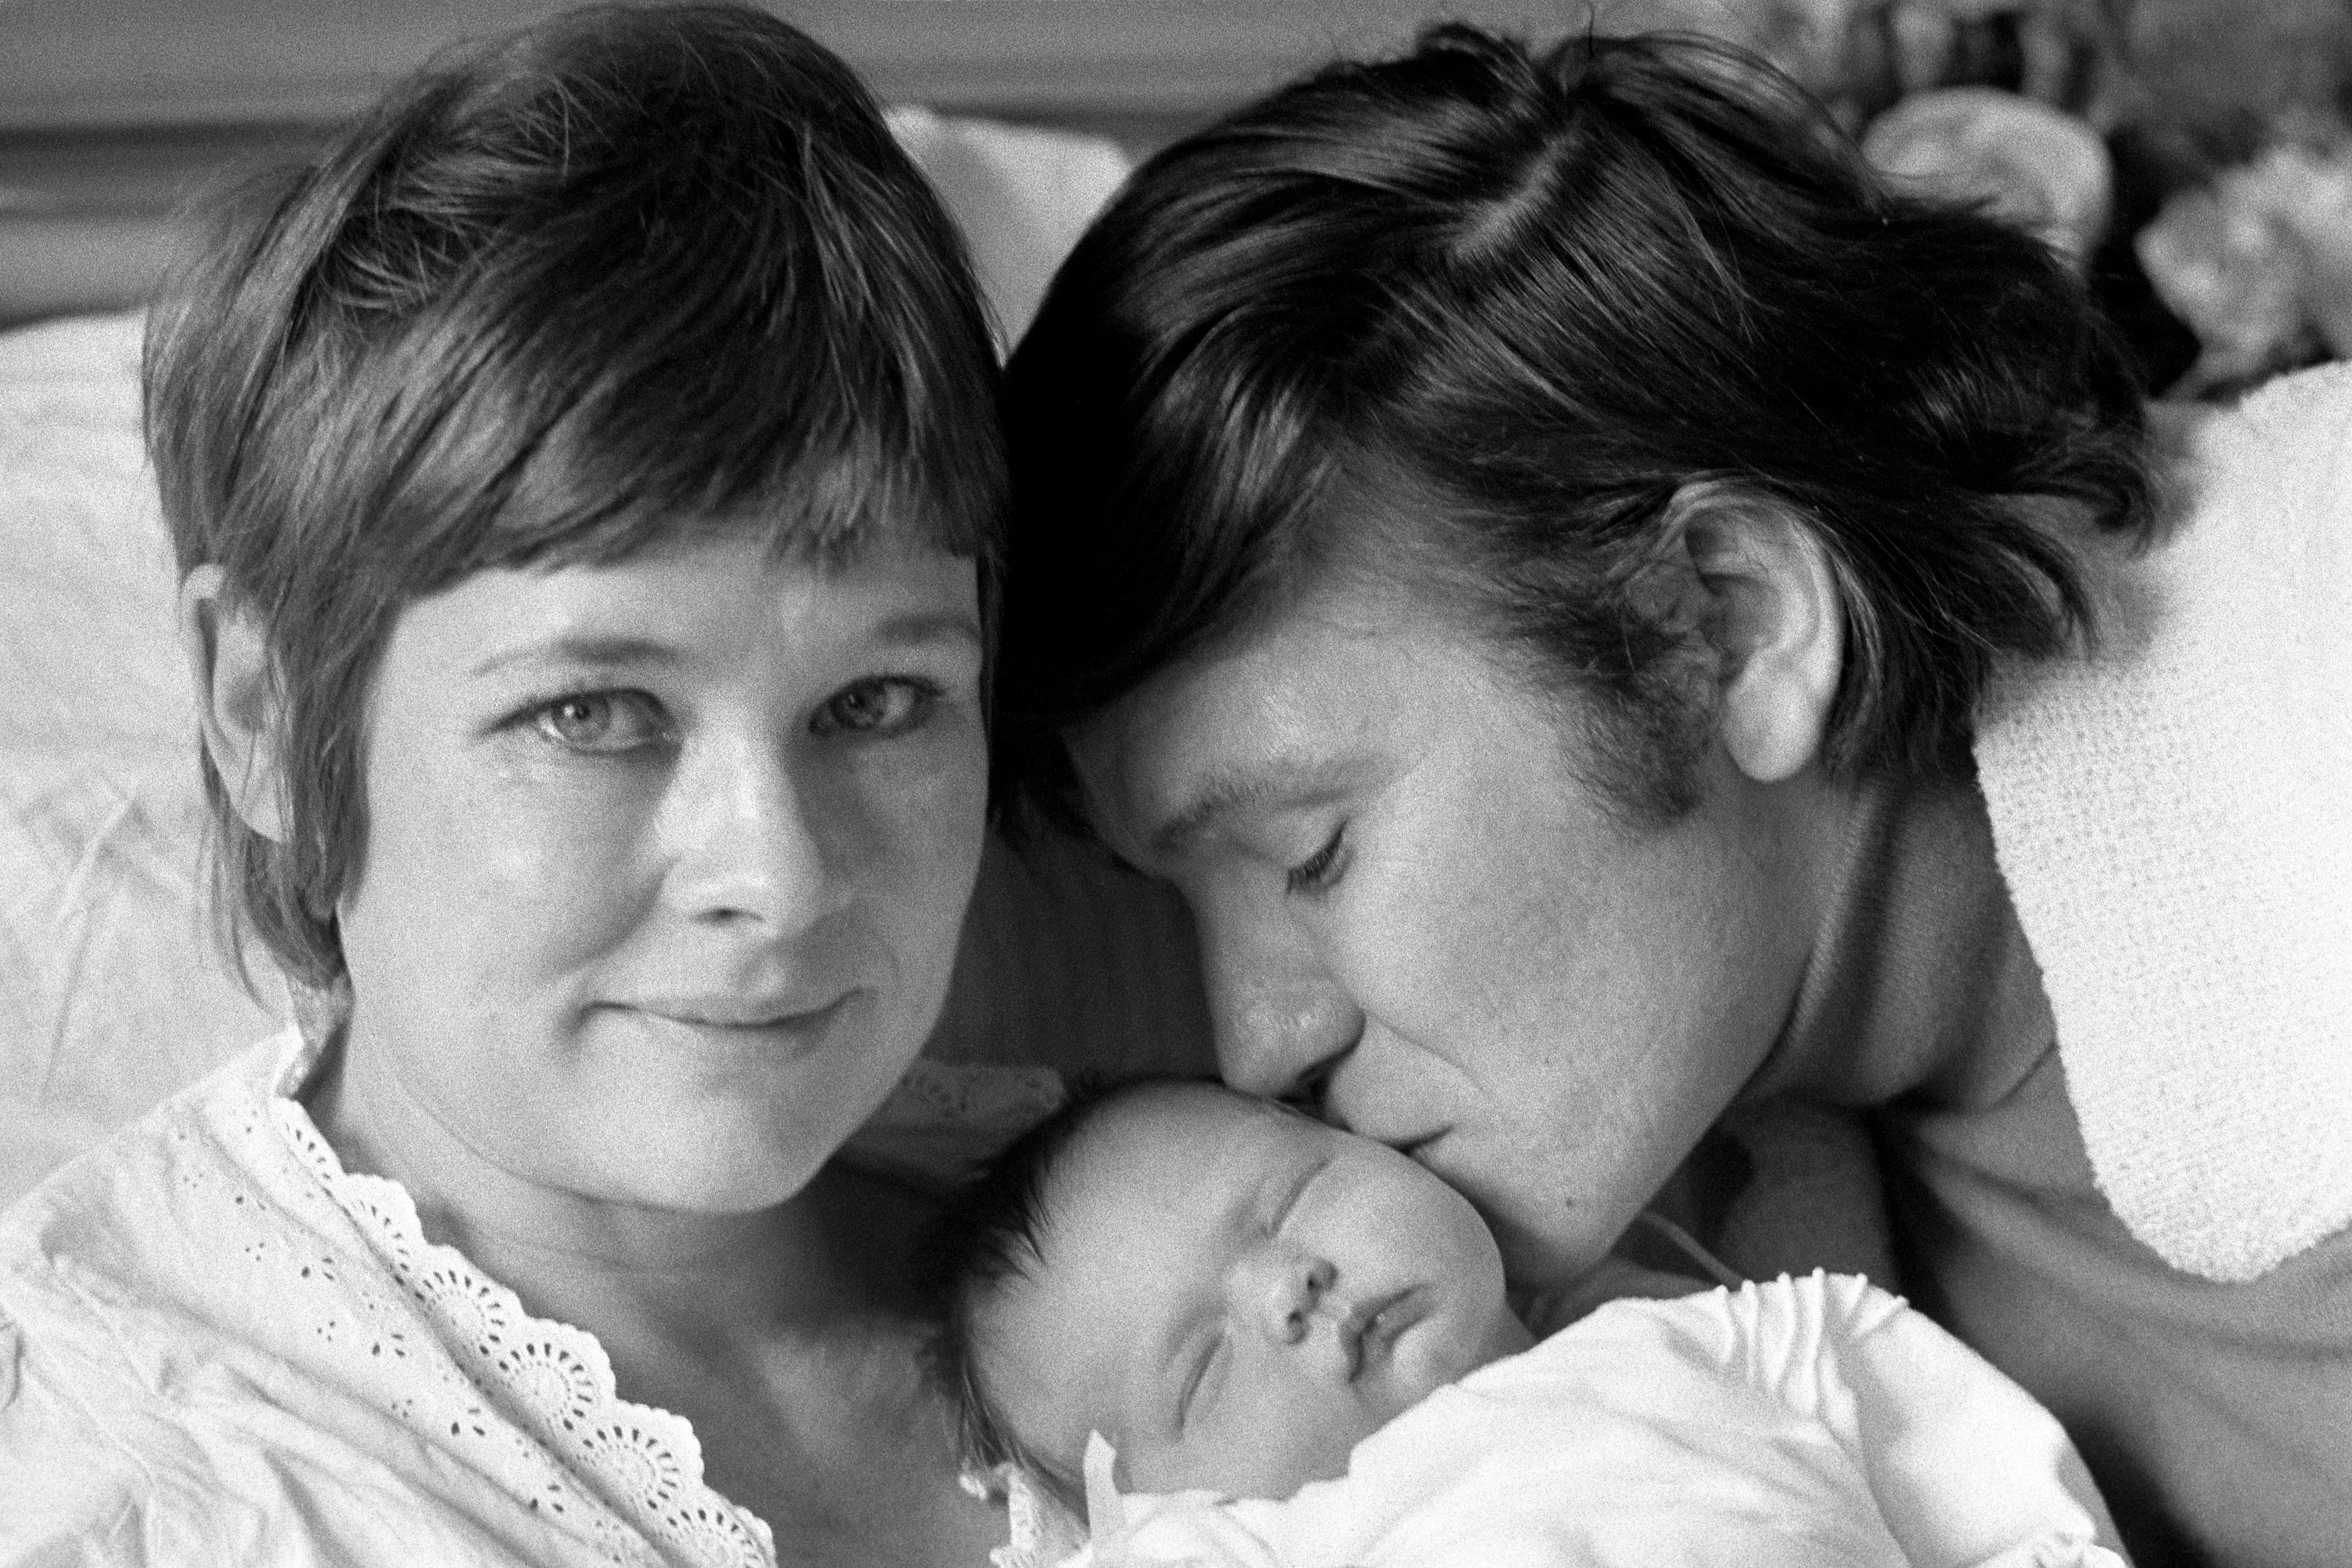 Judi Dench, her husband Michael Williams and their baby. Circa 1972 | Source: Getty Images